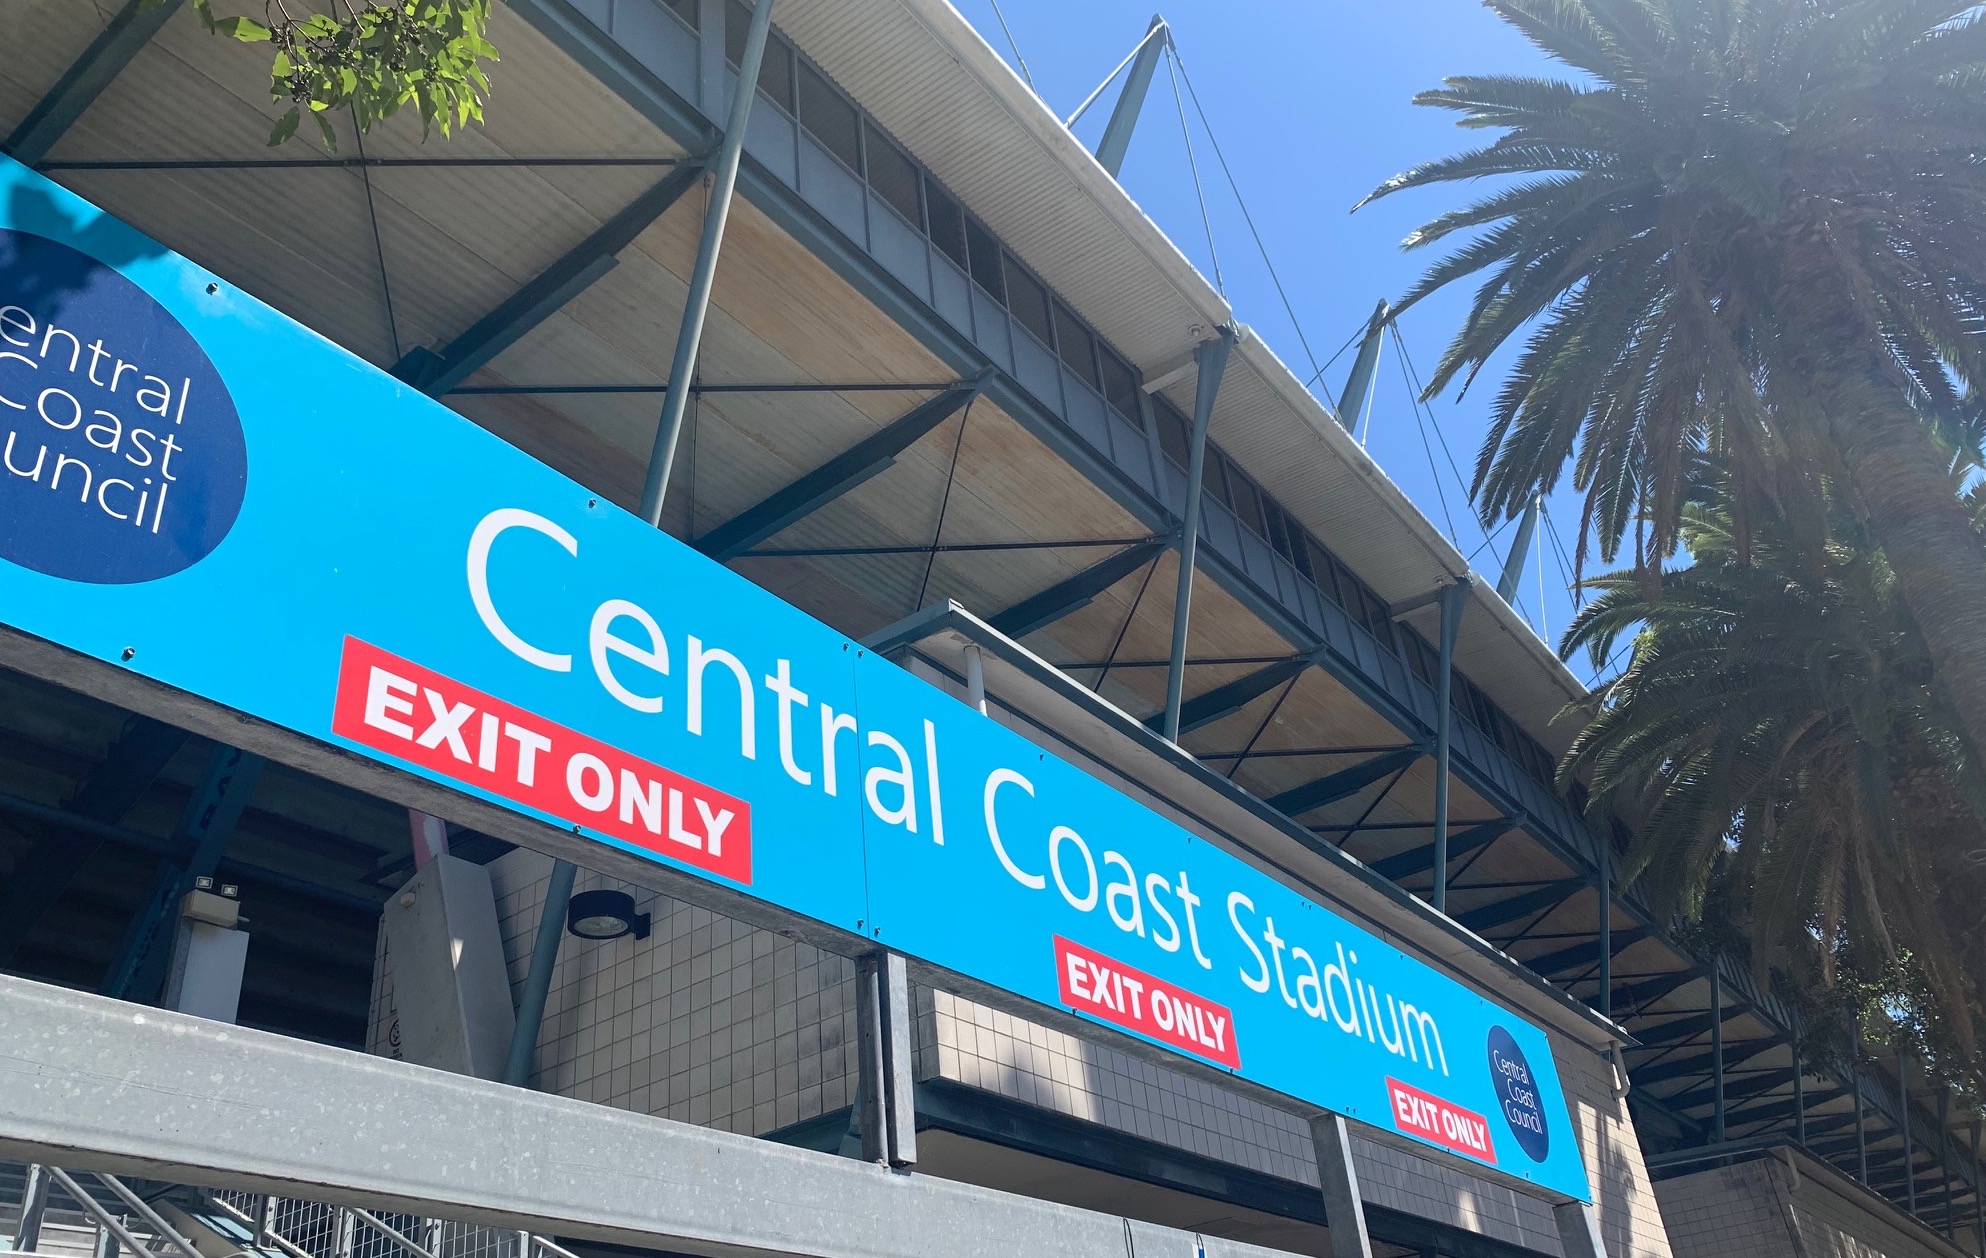 management to take over Central Coast - Central Coast News